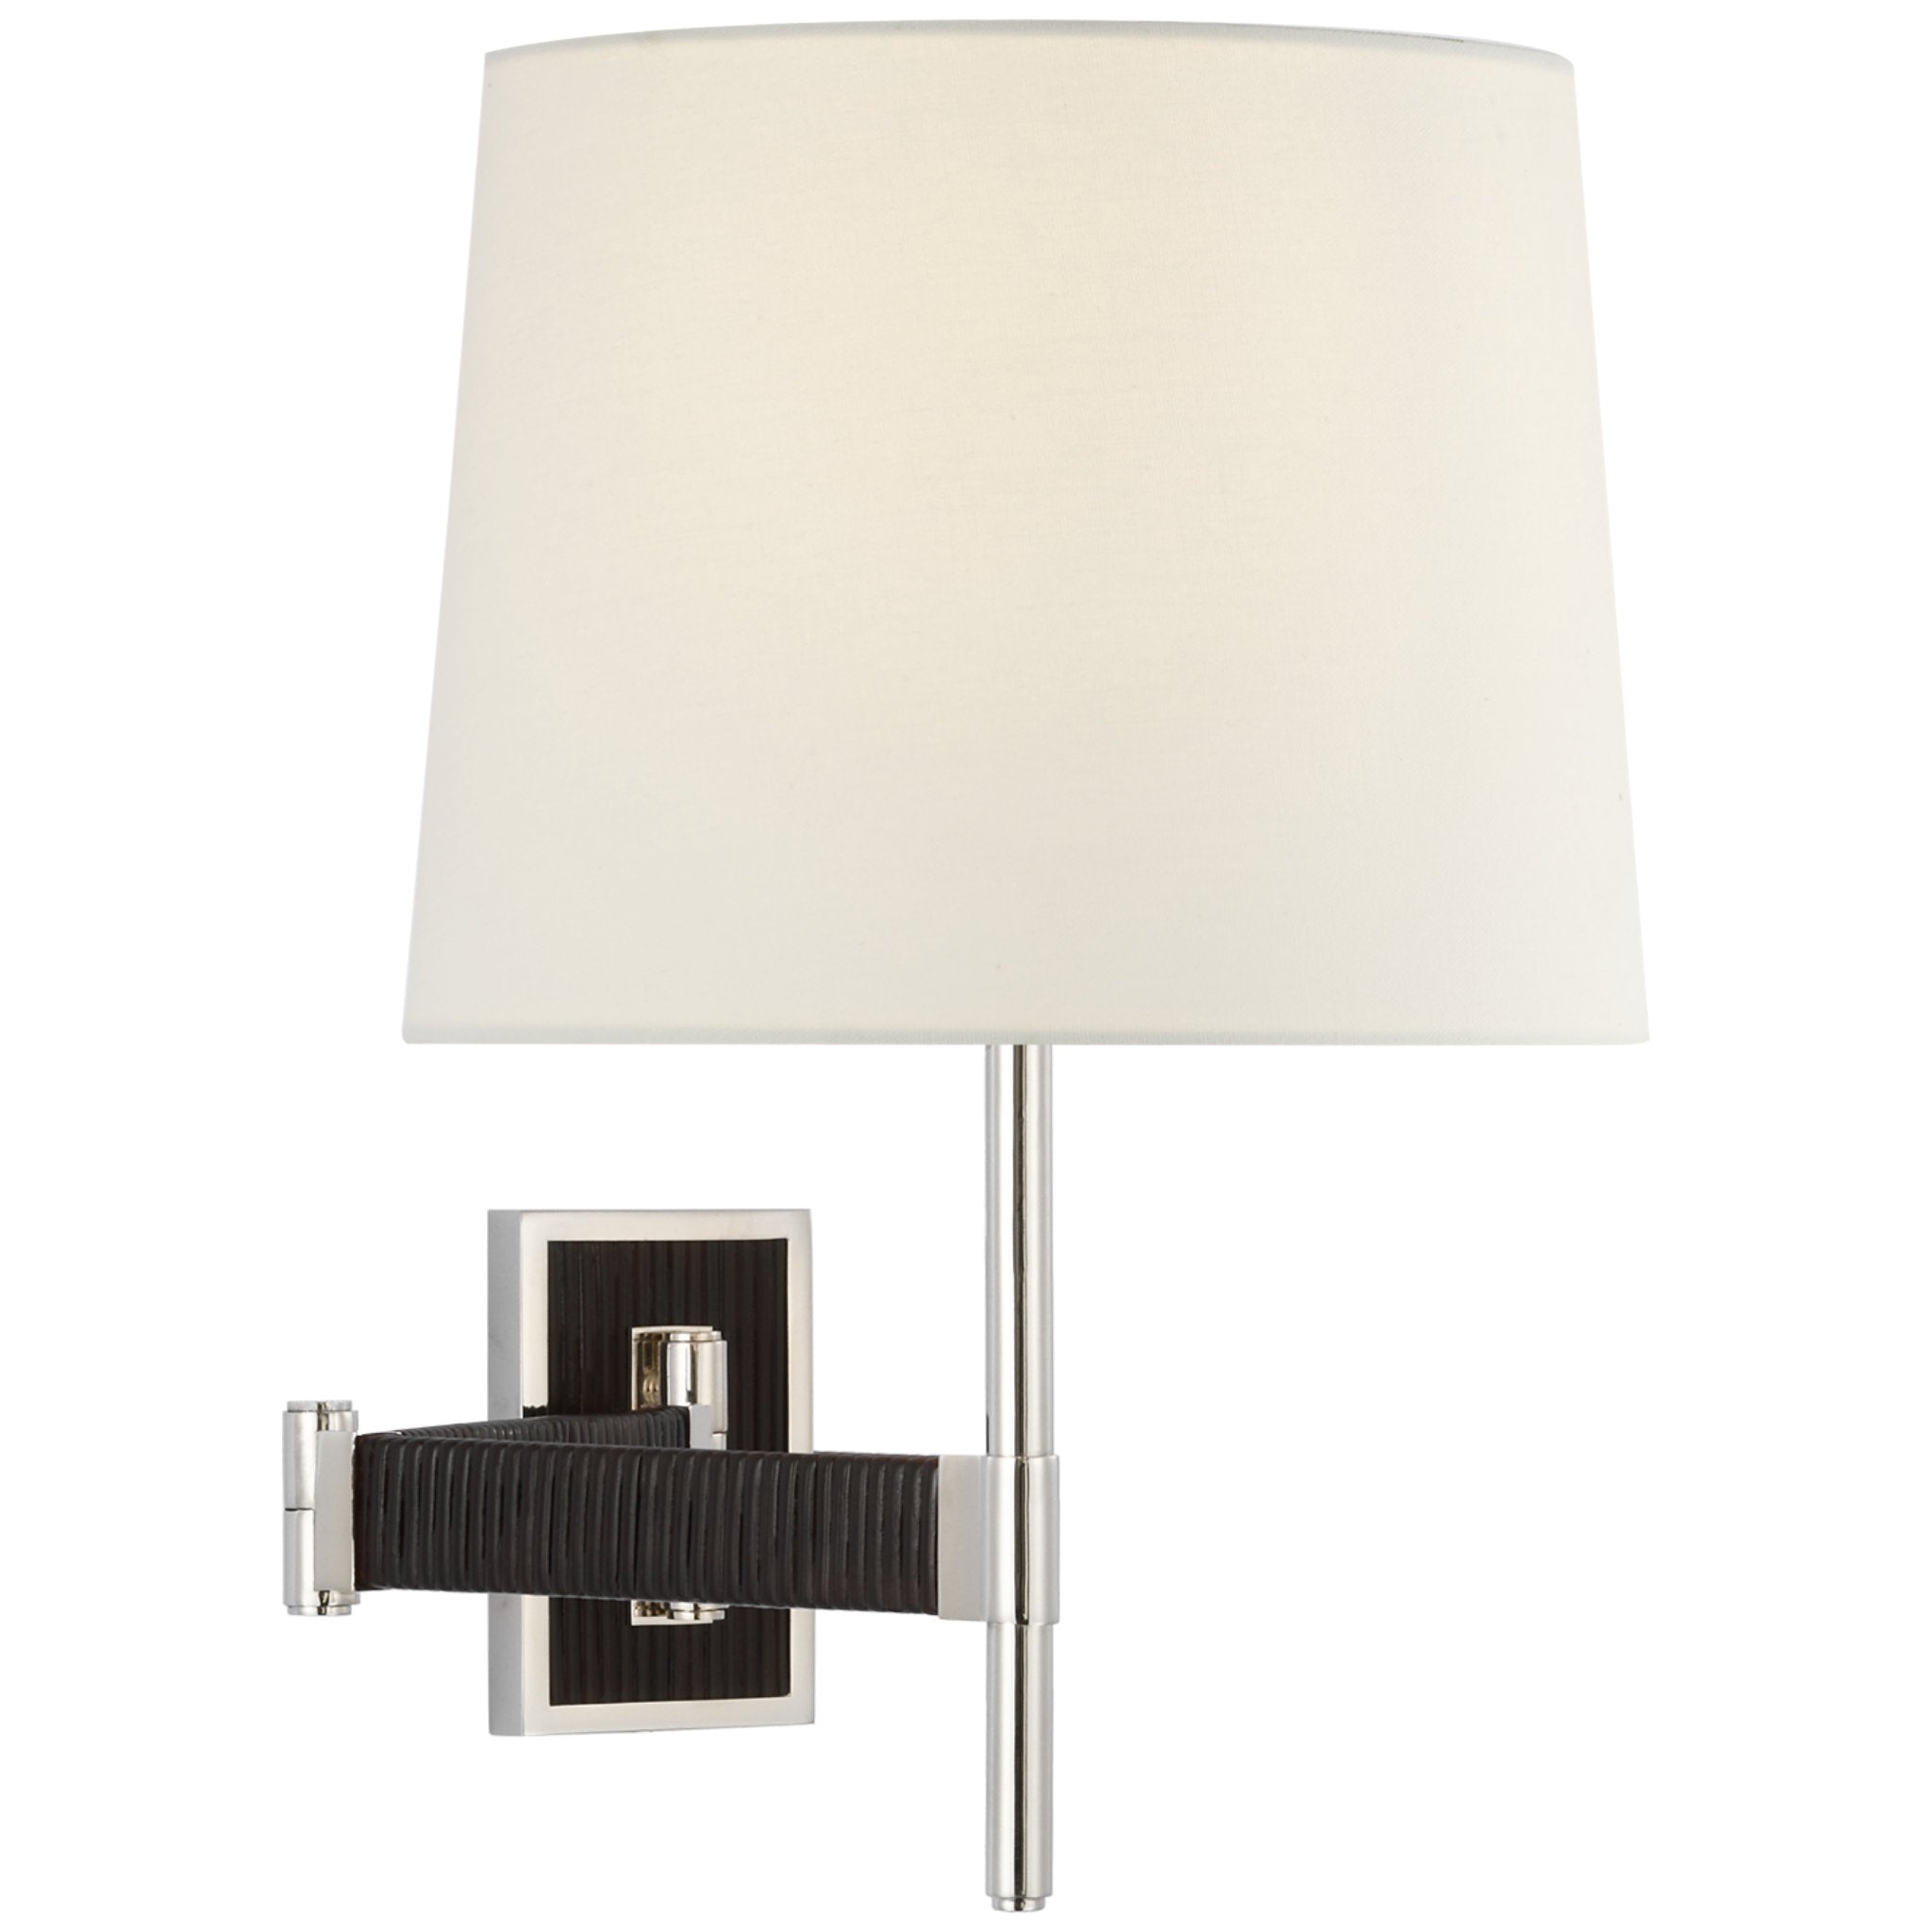 Suzanne Kasler Elle Swing Arm Sconce in Polished Nickel and Black Rattan with Linen Shade